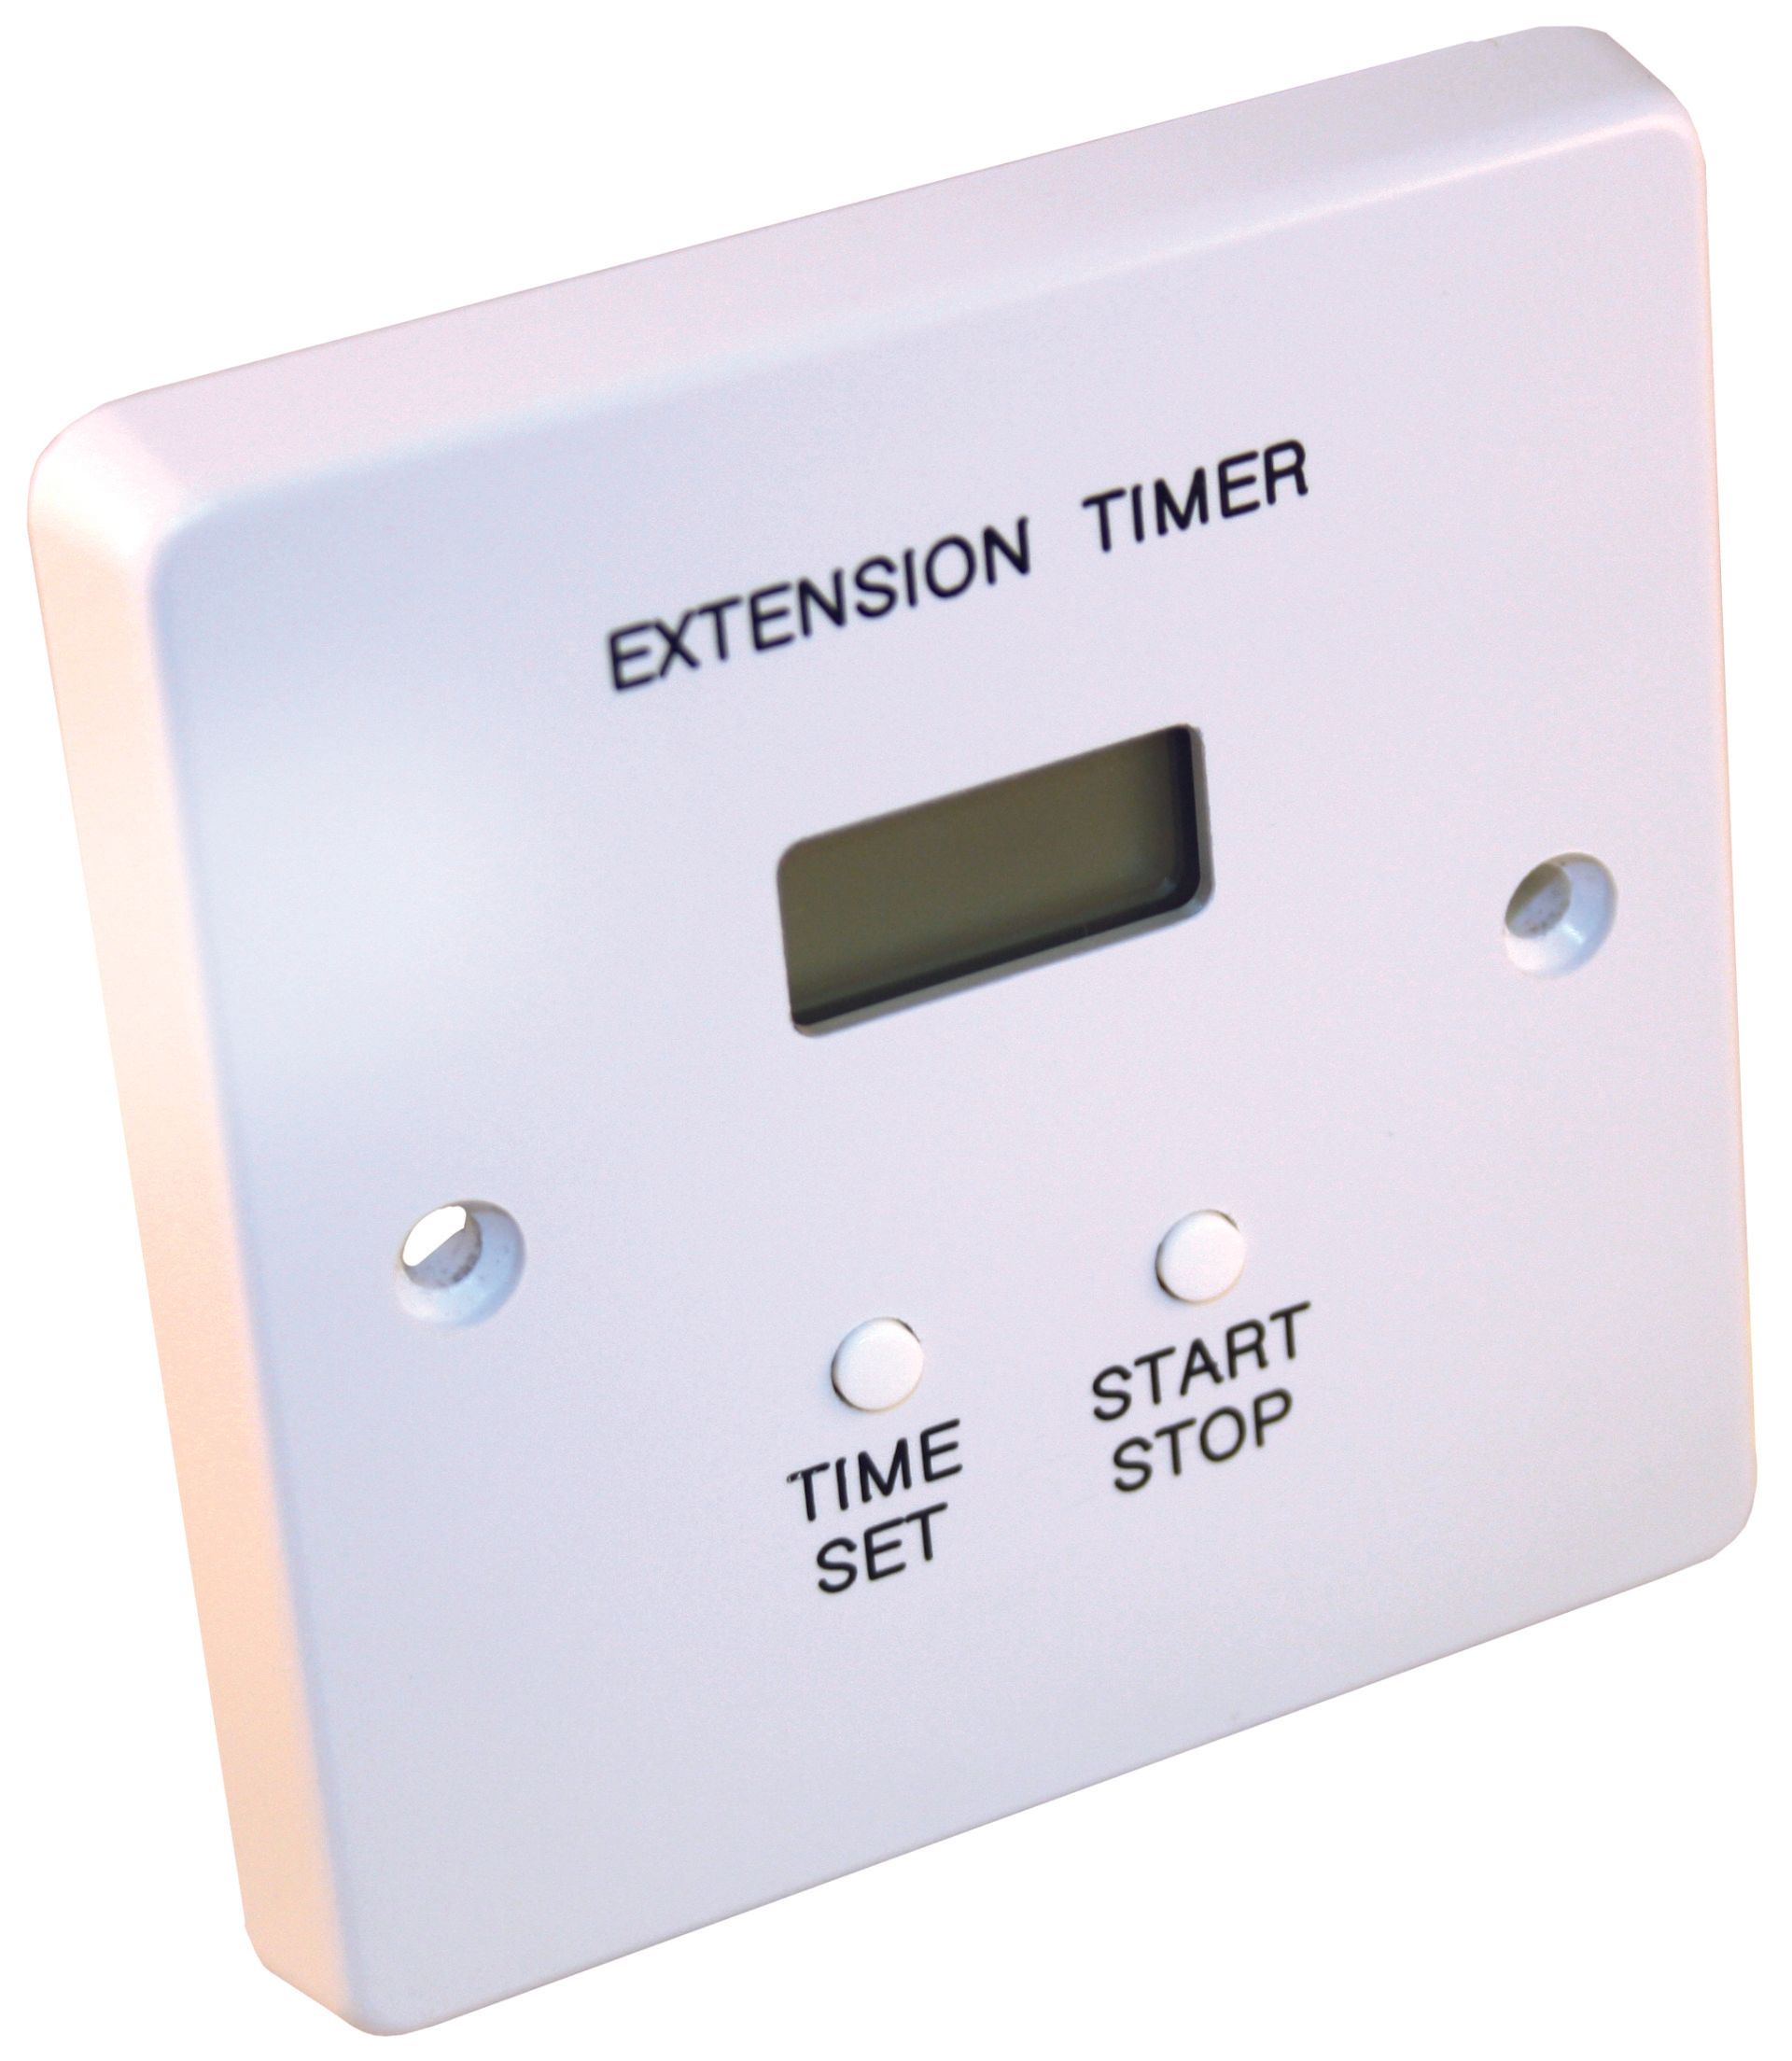 PLANT EXTENSION TIMERS